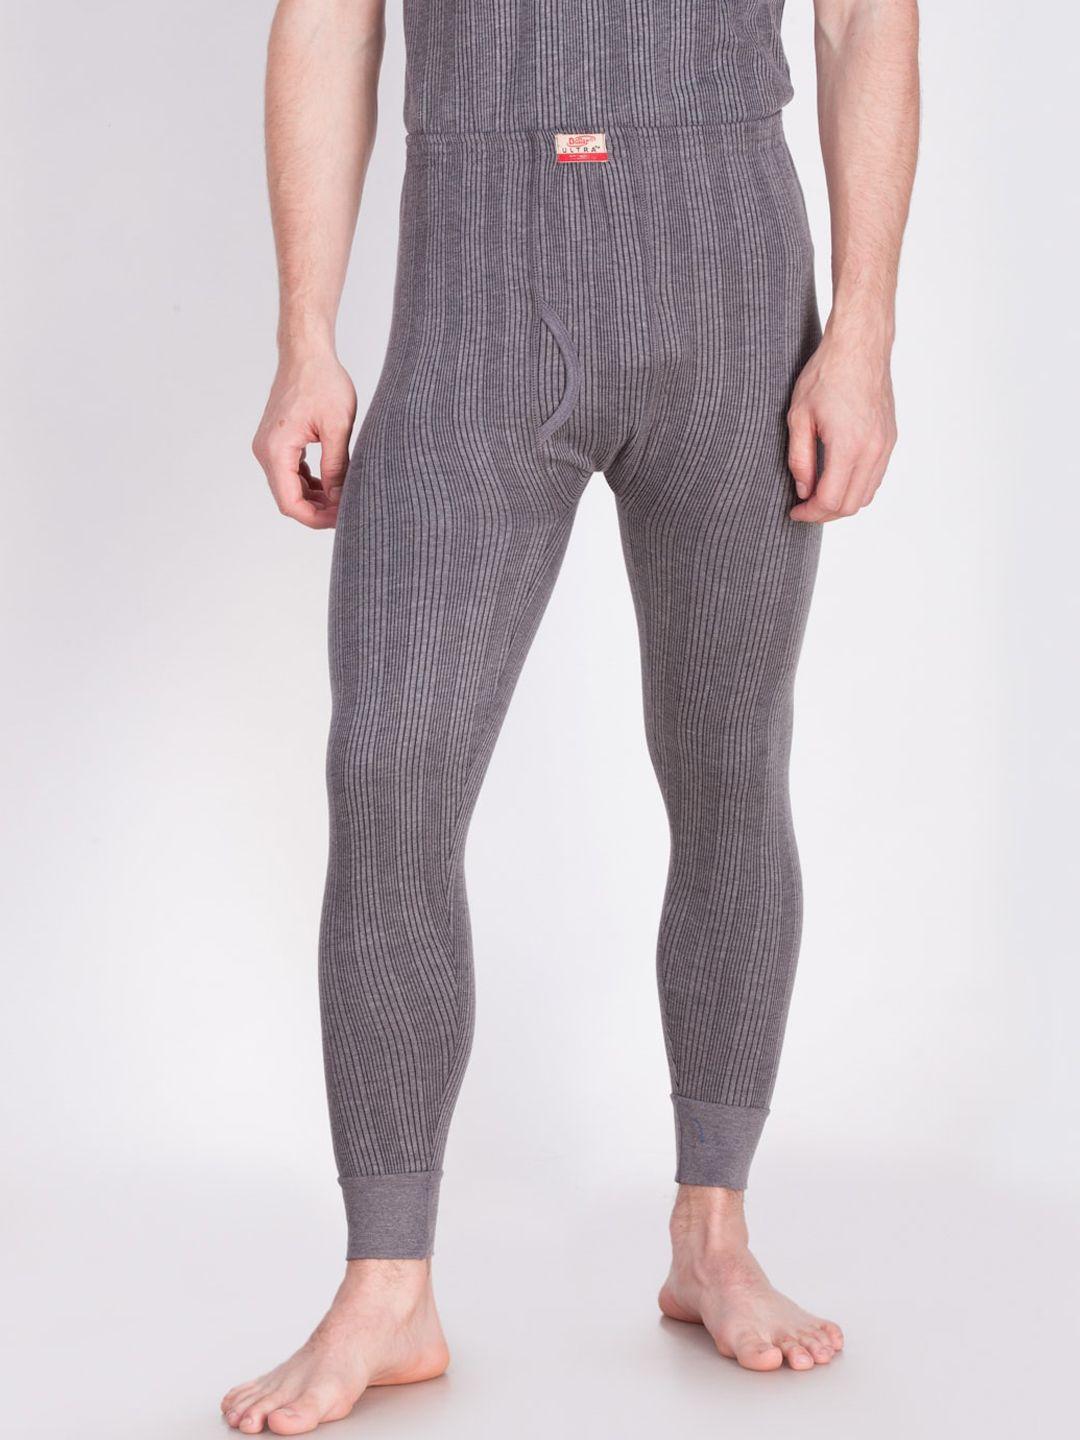 dollar-ultra-men-charcoal-grey-striped-thermal-bottoms